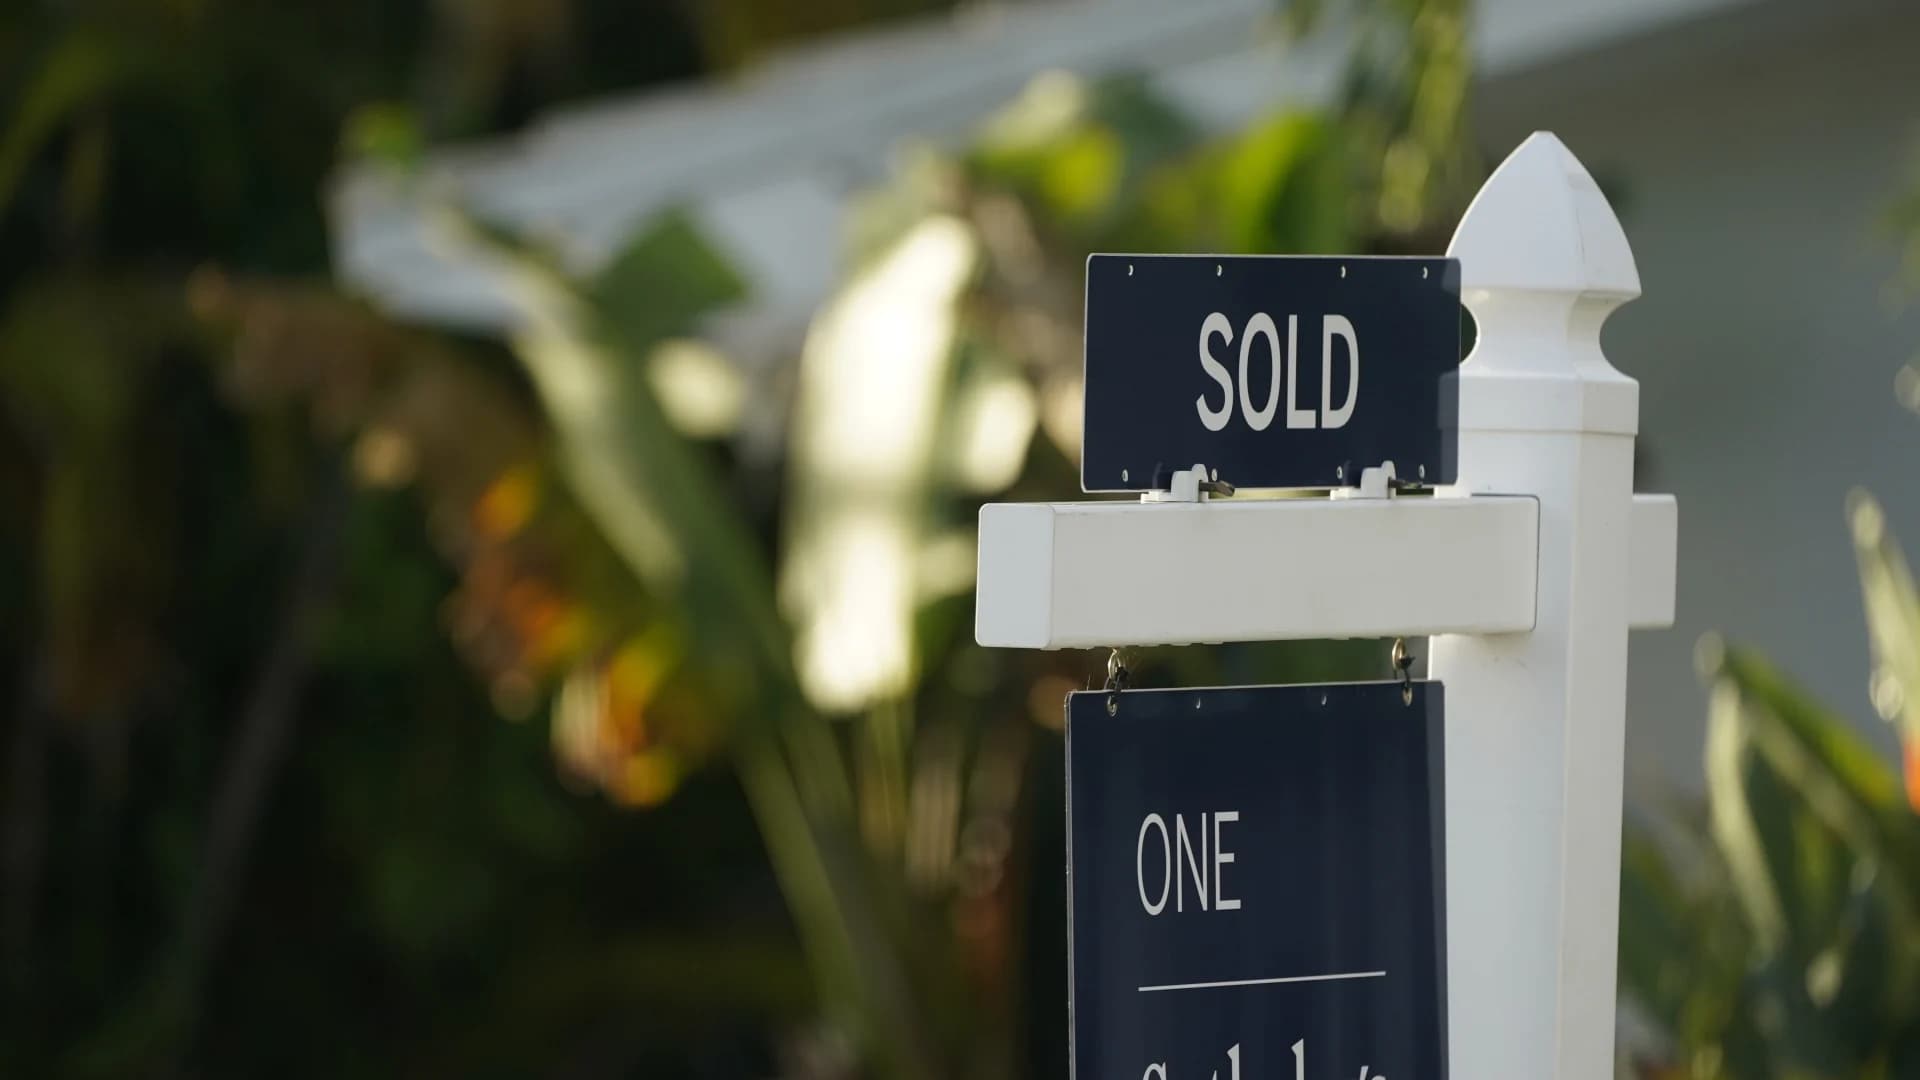 Long-term US mortgage rates hit 3.92%, highest since 2019